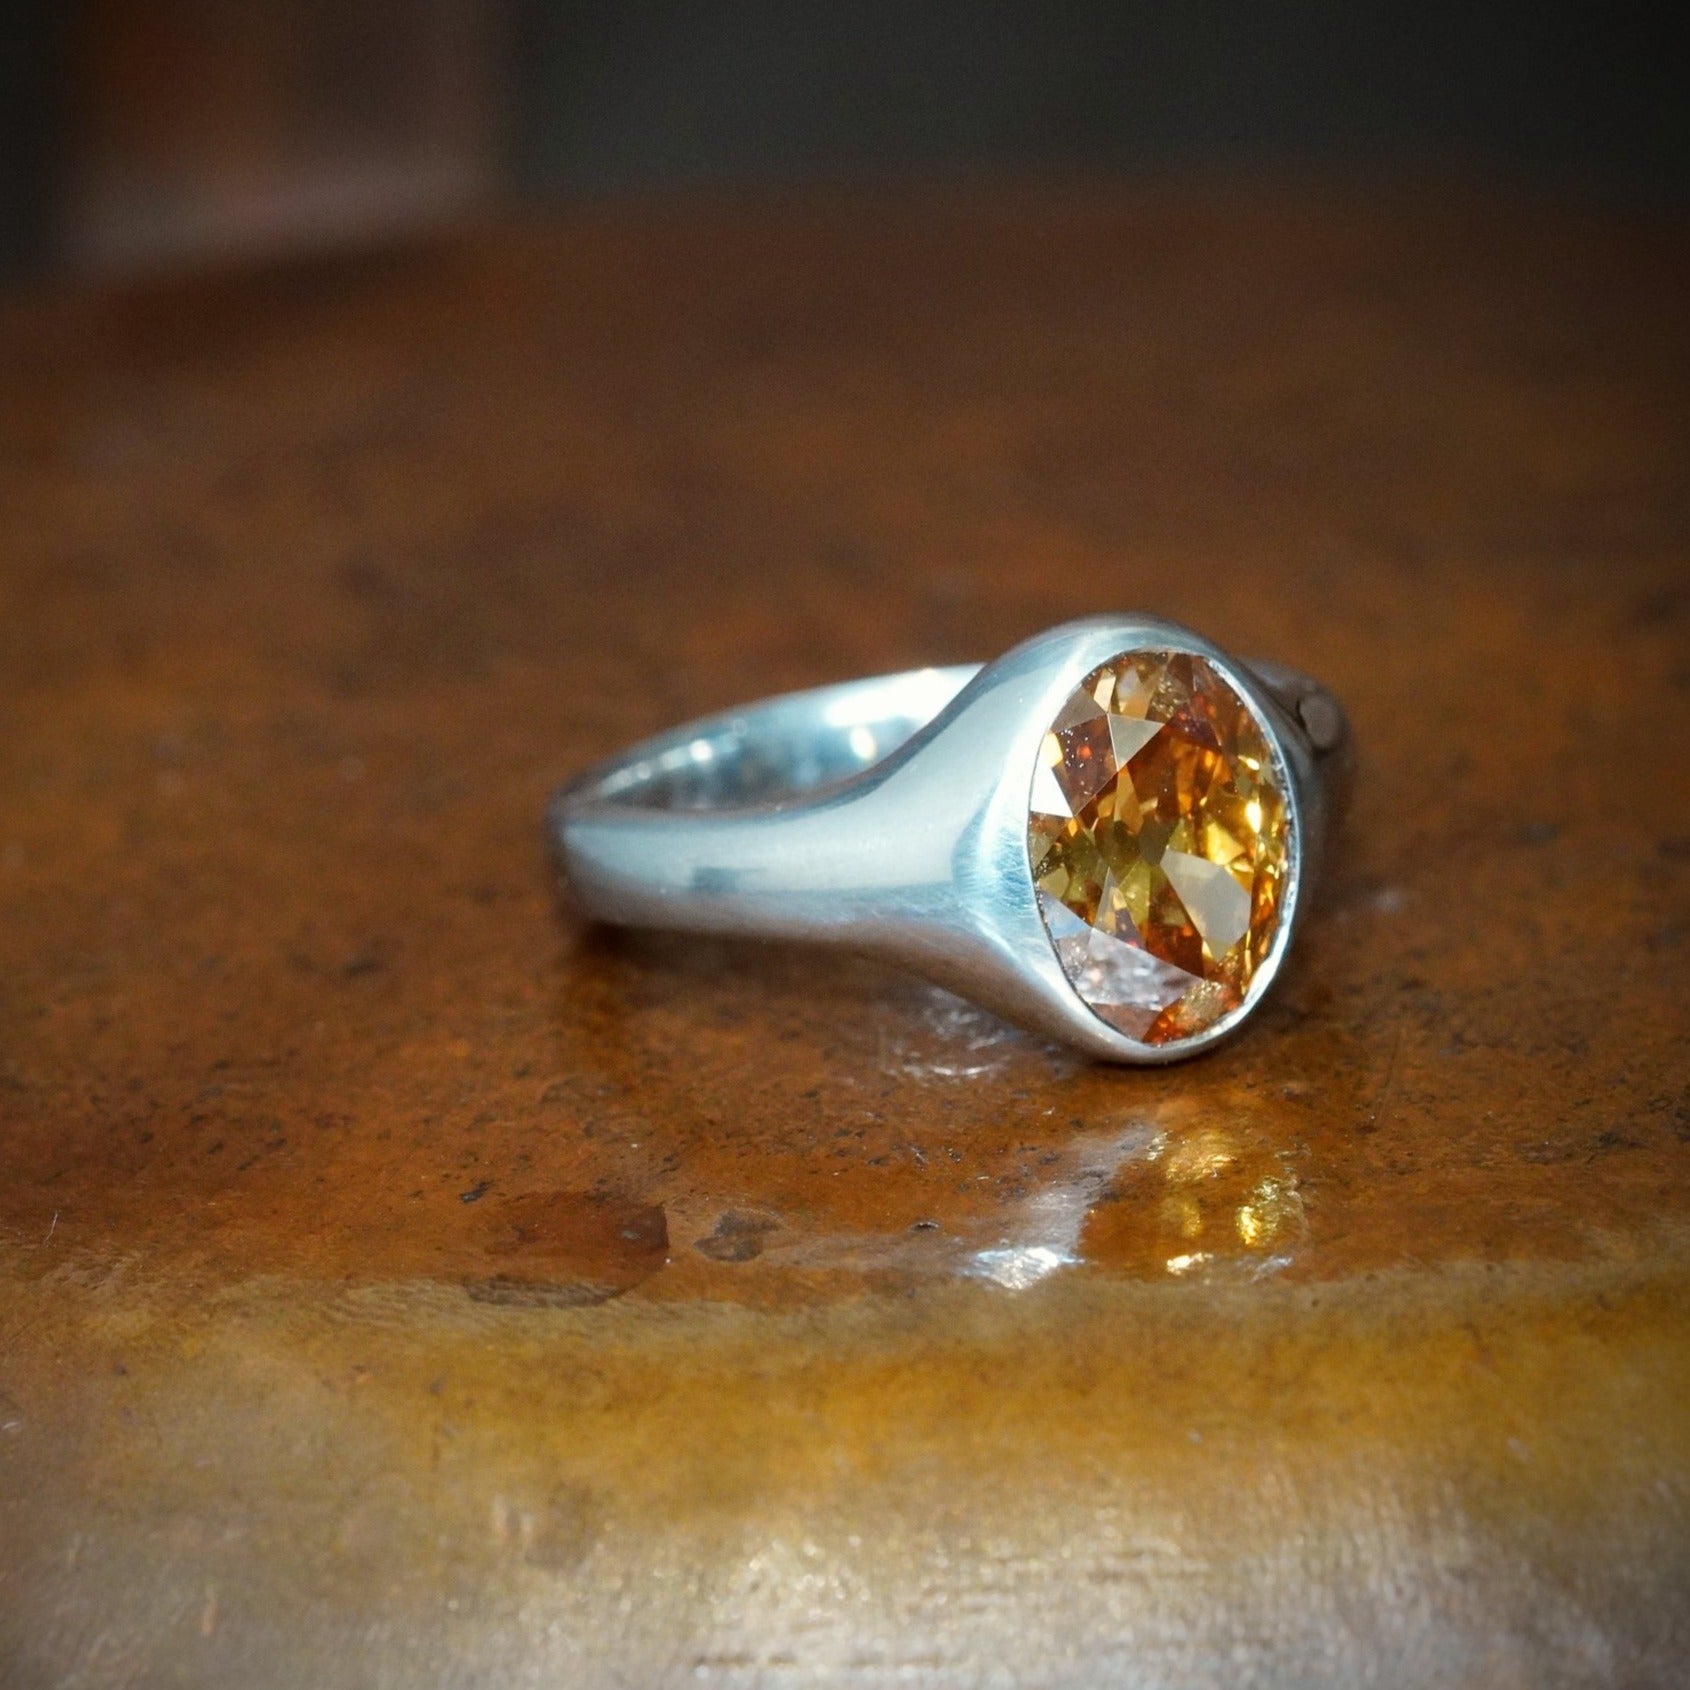 Victorian-Inspired 2.10 CT Oval Diamond Ring